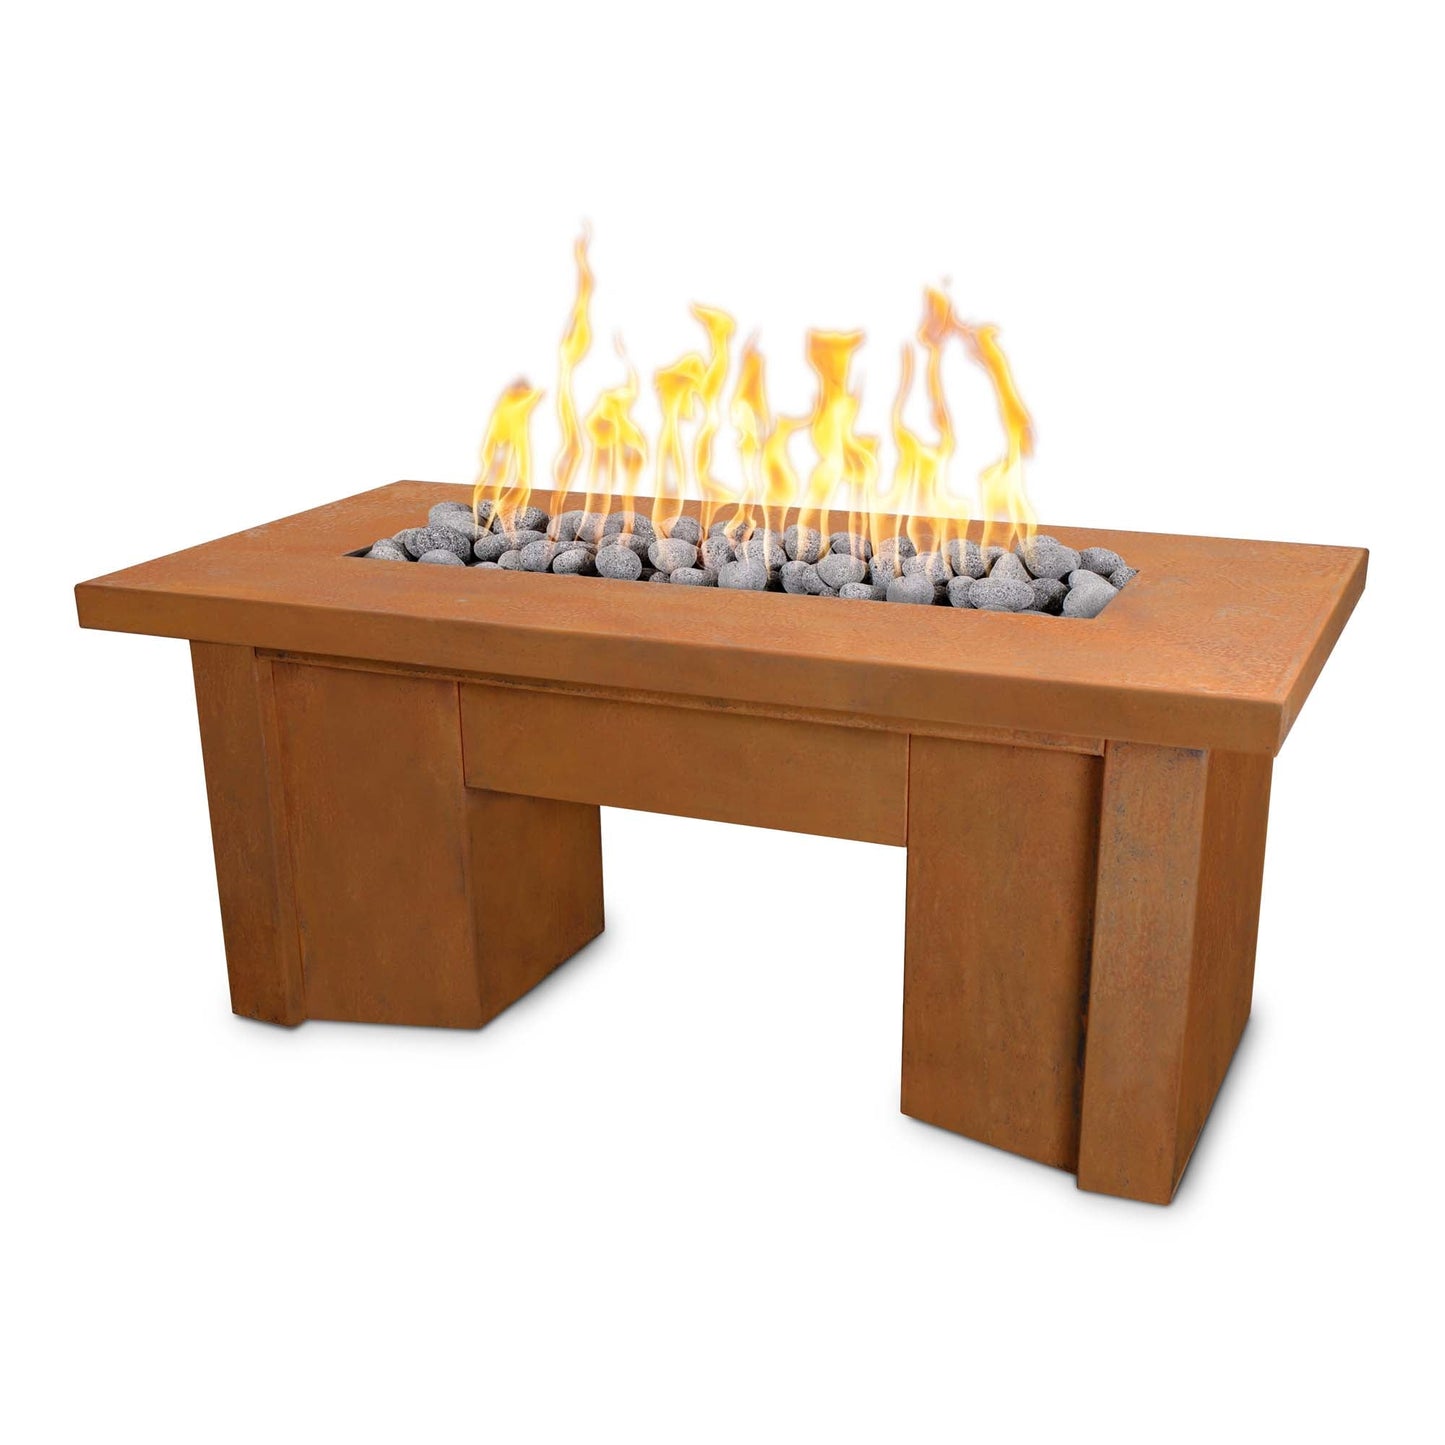 The Outdoor Plus Rectangular Alameda 48" Corten Steel Liquid Propane Fire Pit with 110V Electronic Ignition